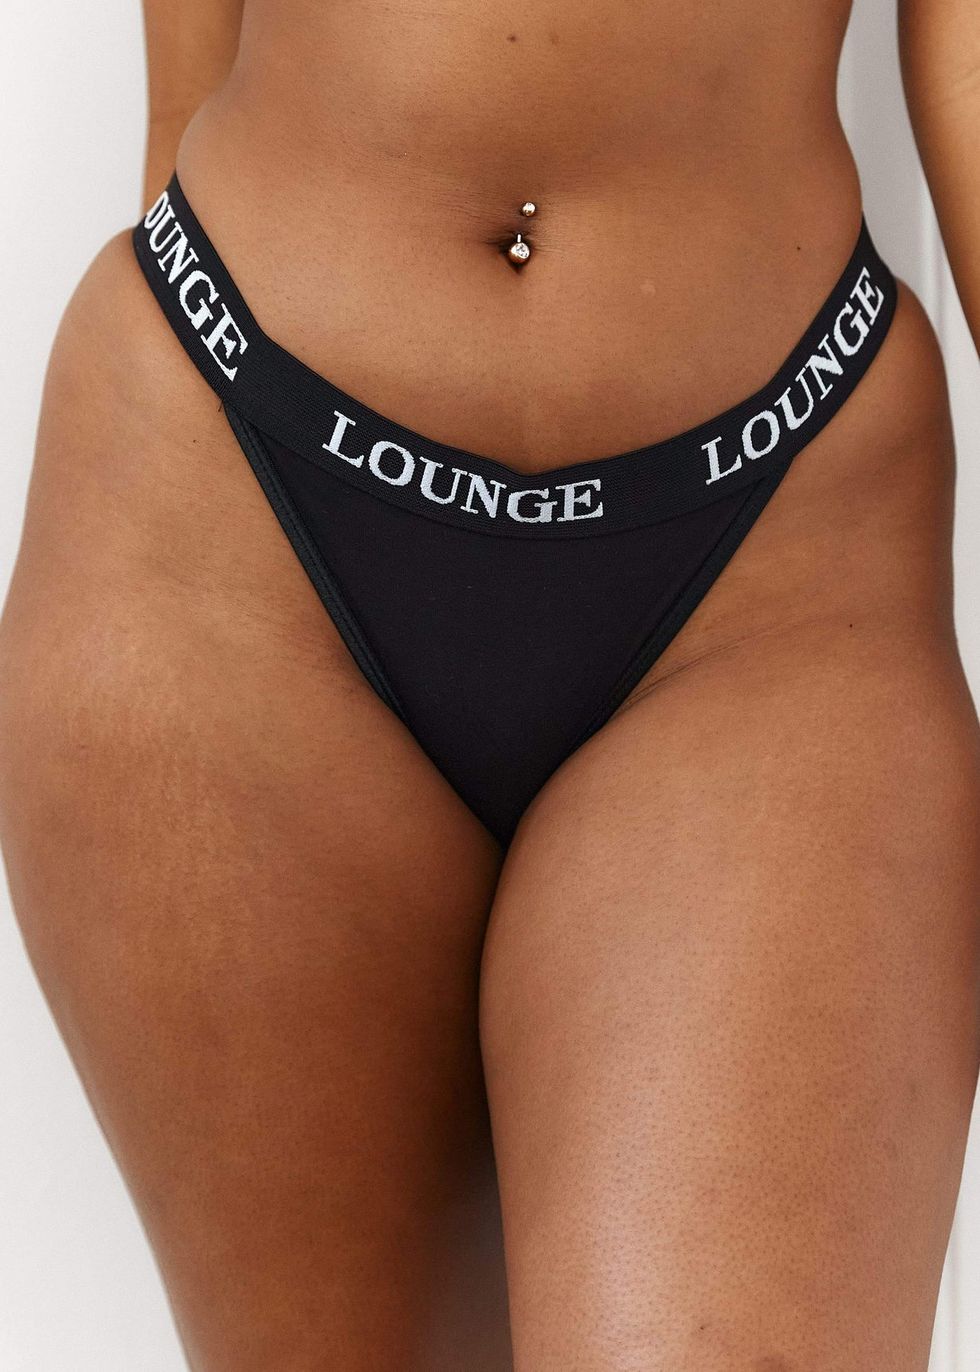 Give a girl the right underwear and she - Lounge Underwear